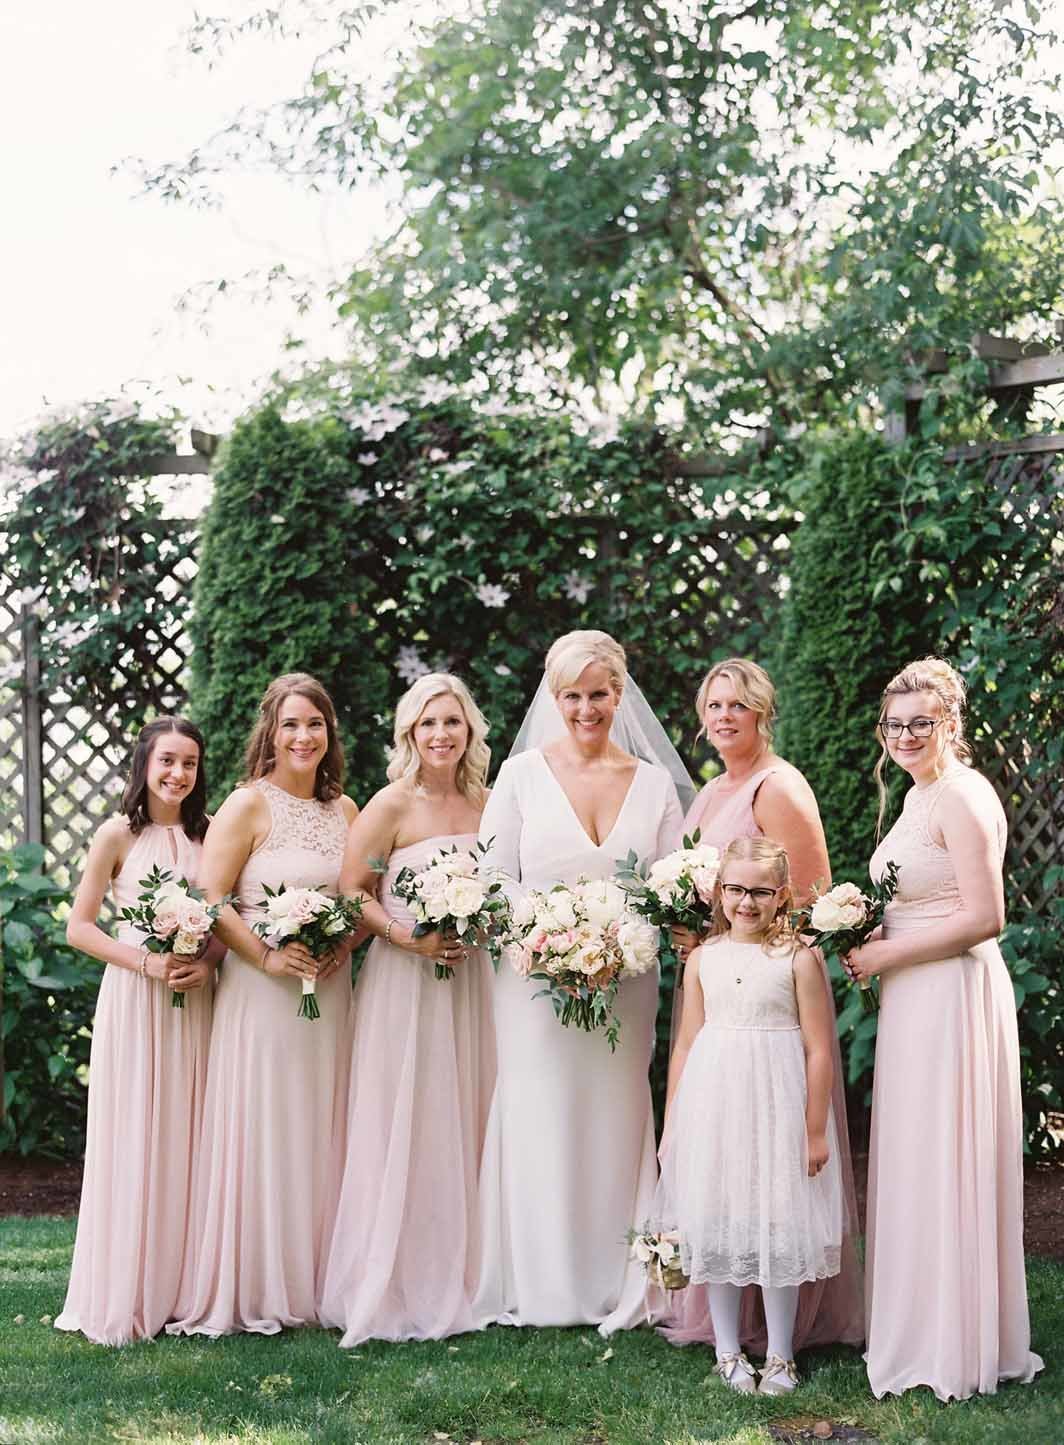 bride and brides maids in blush pink dresses in garden with greenery trellis